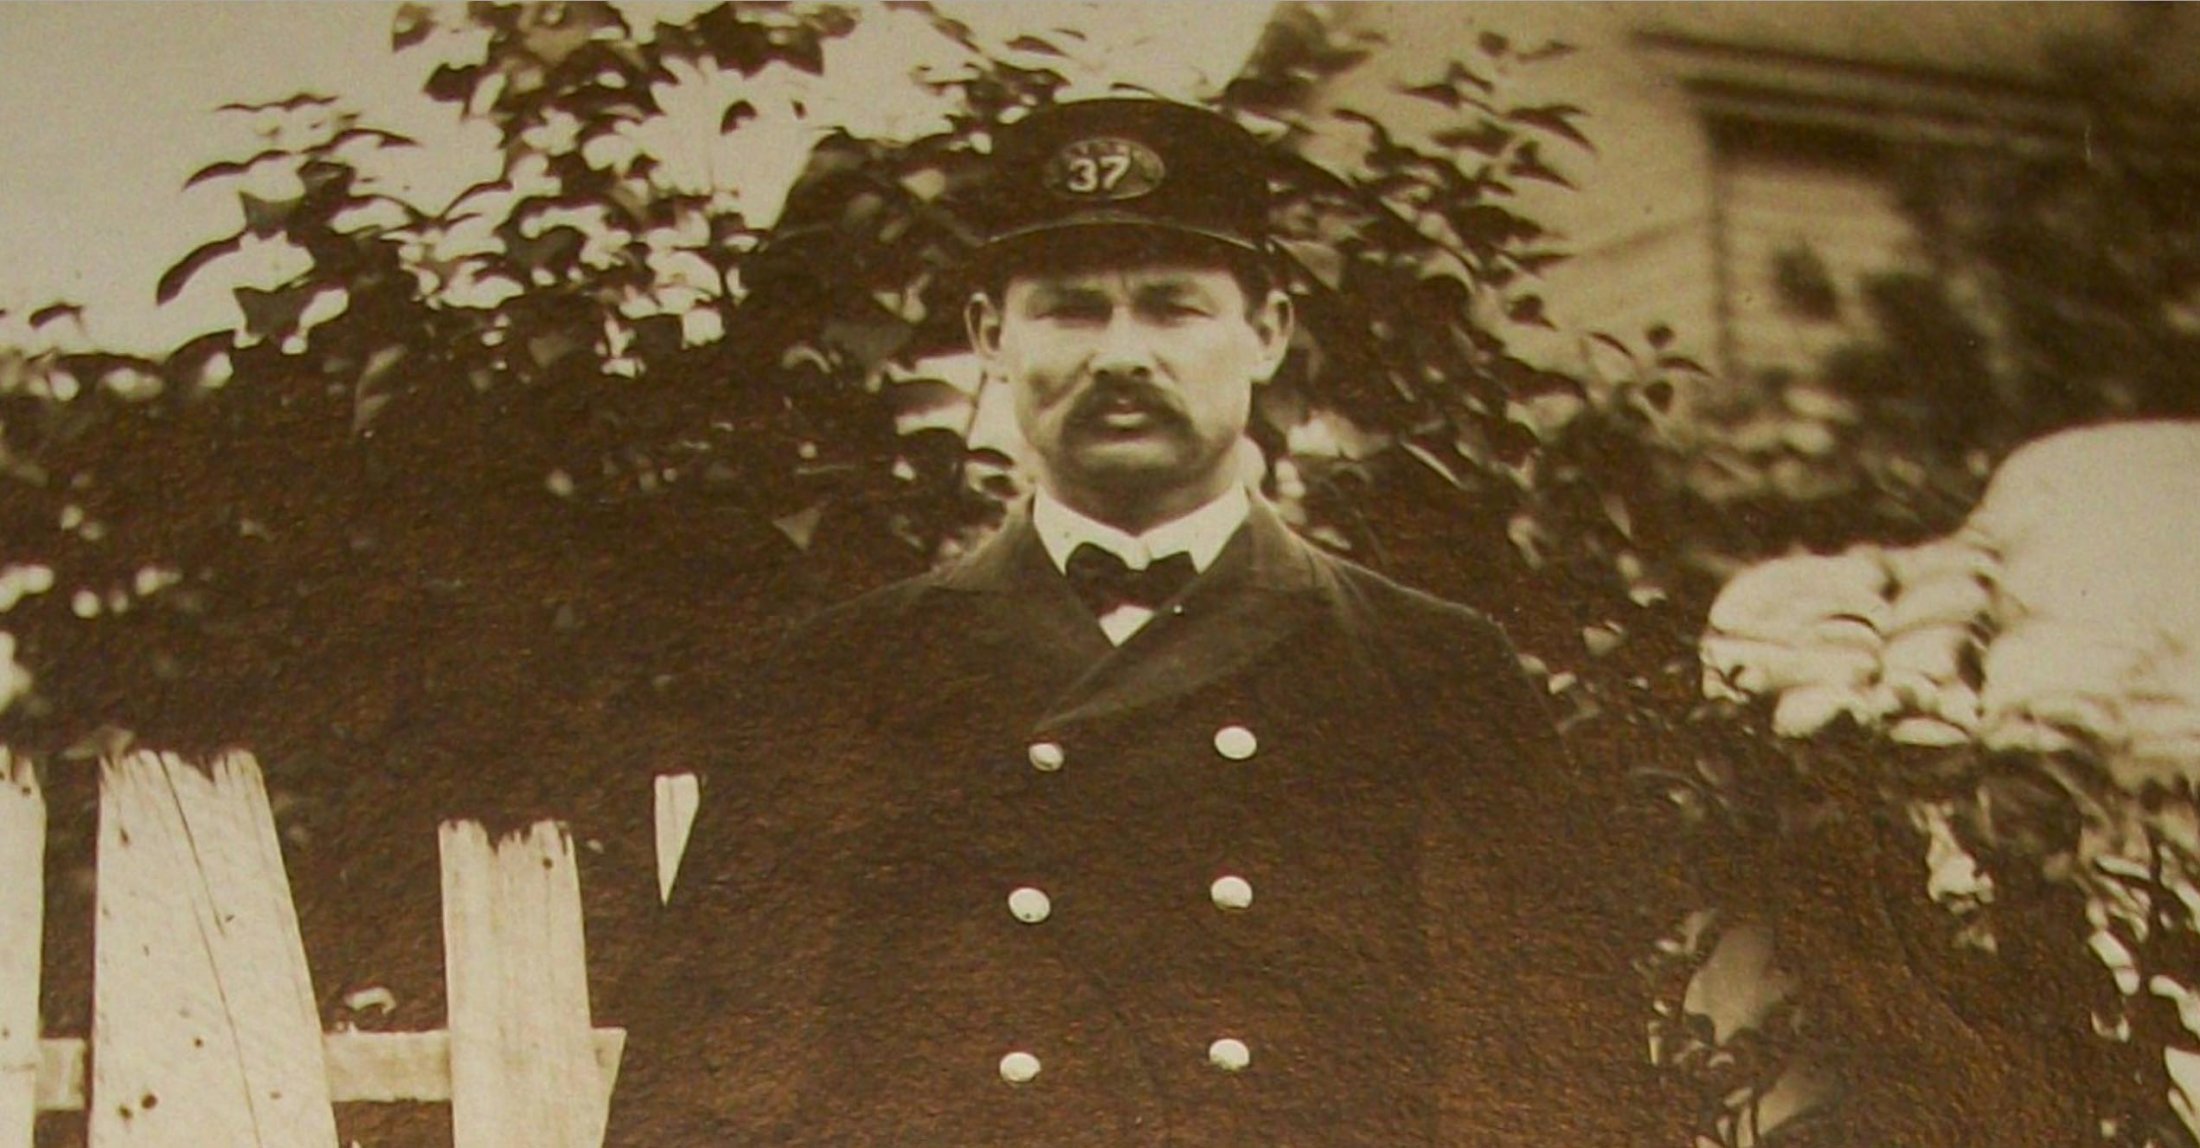 Bordentown - Unidentified fireman - probably 1900s-10s